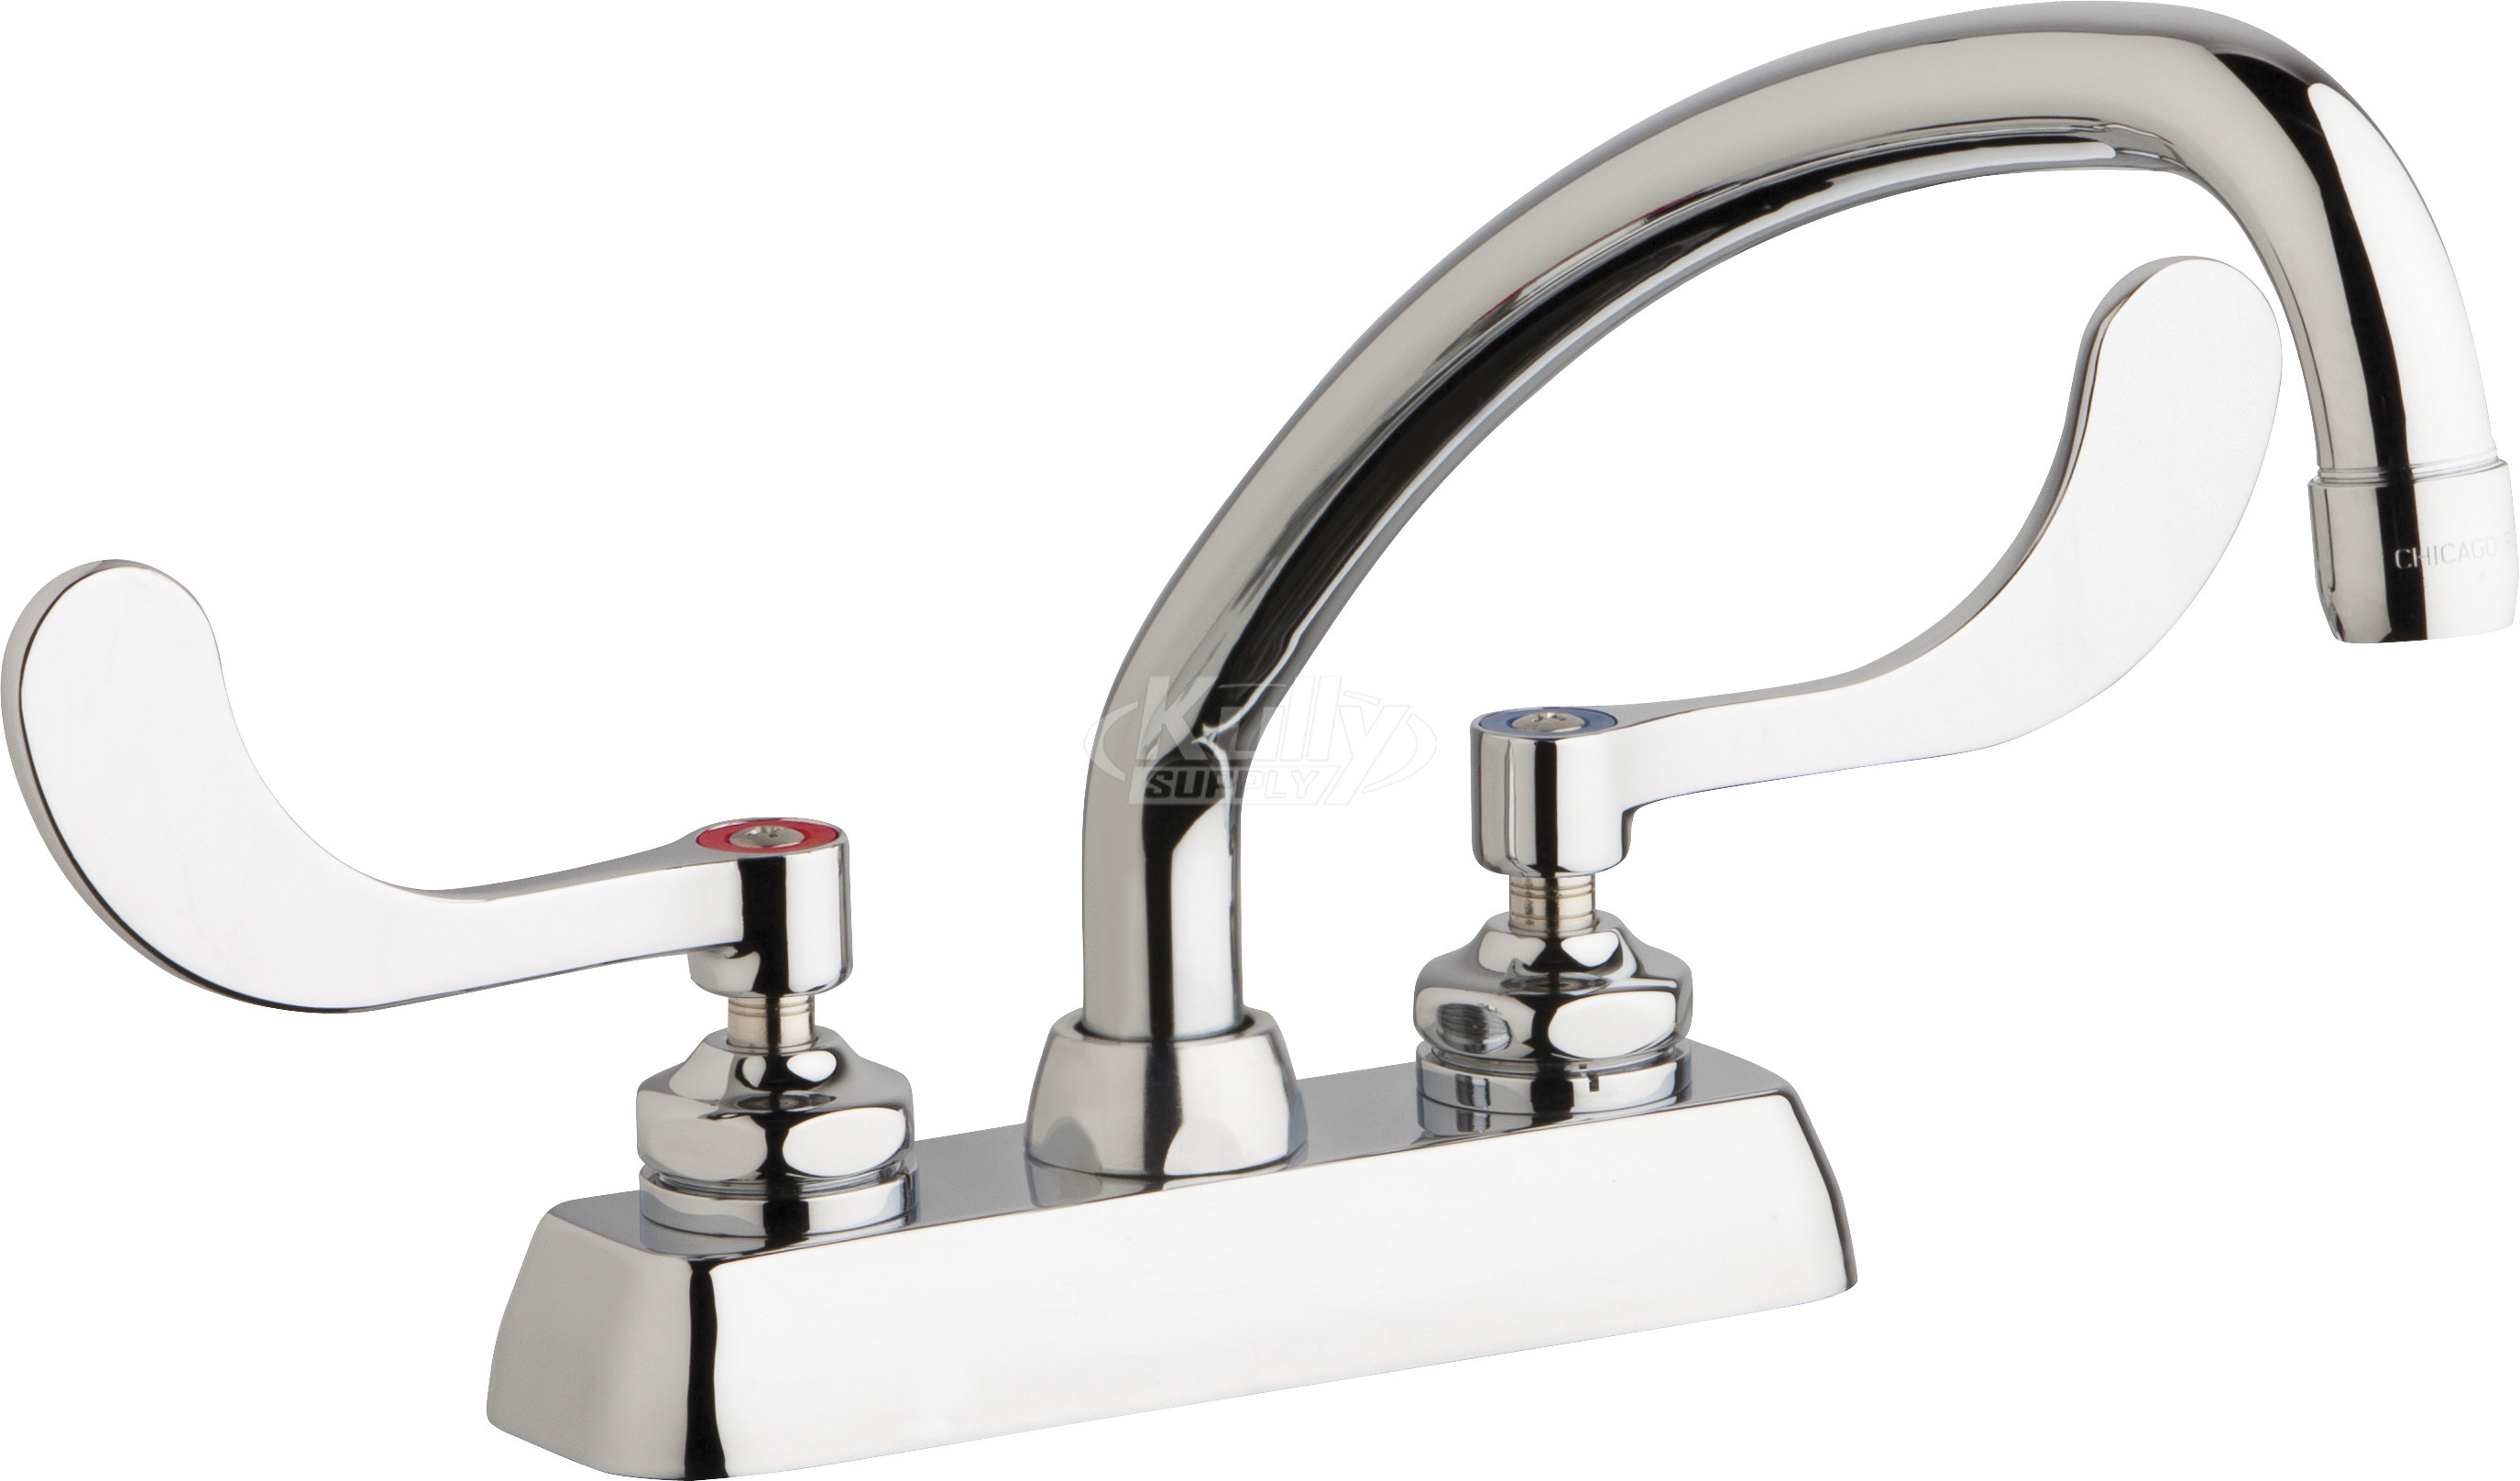 Chicago W4D-L9E35-317ABCP Hot and Cold Water Workboard Sink Faucet